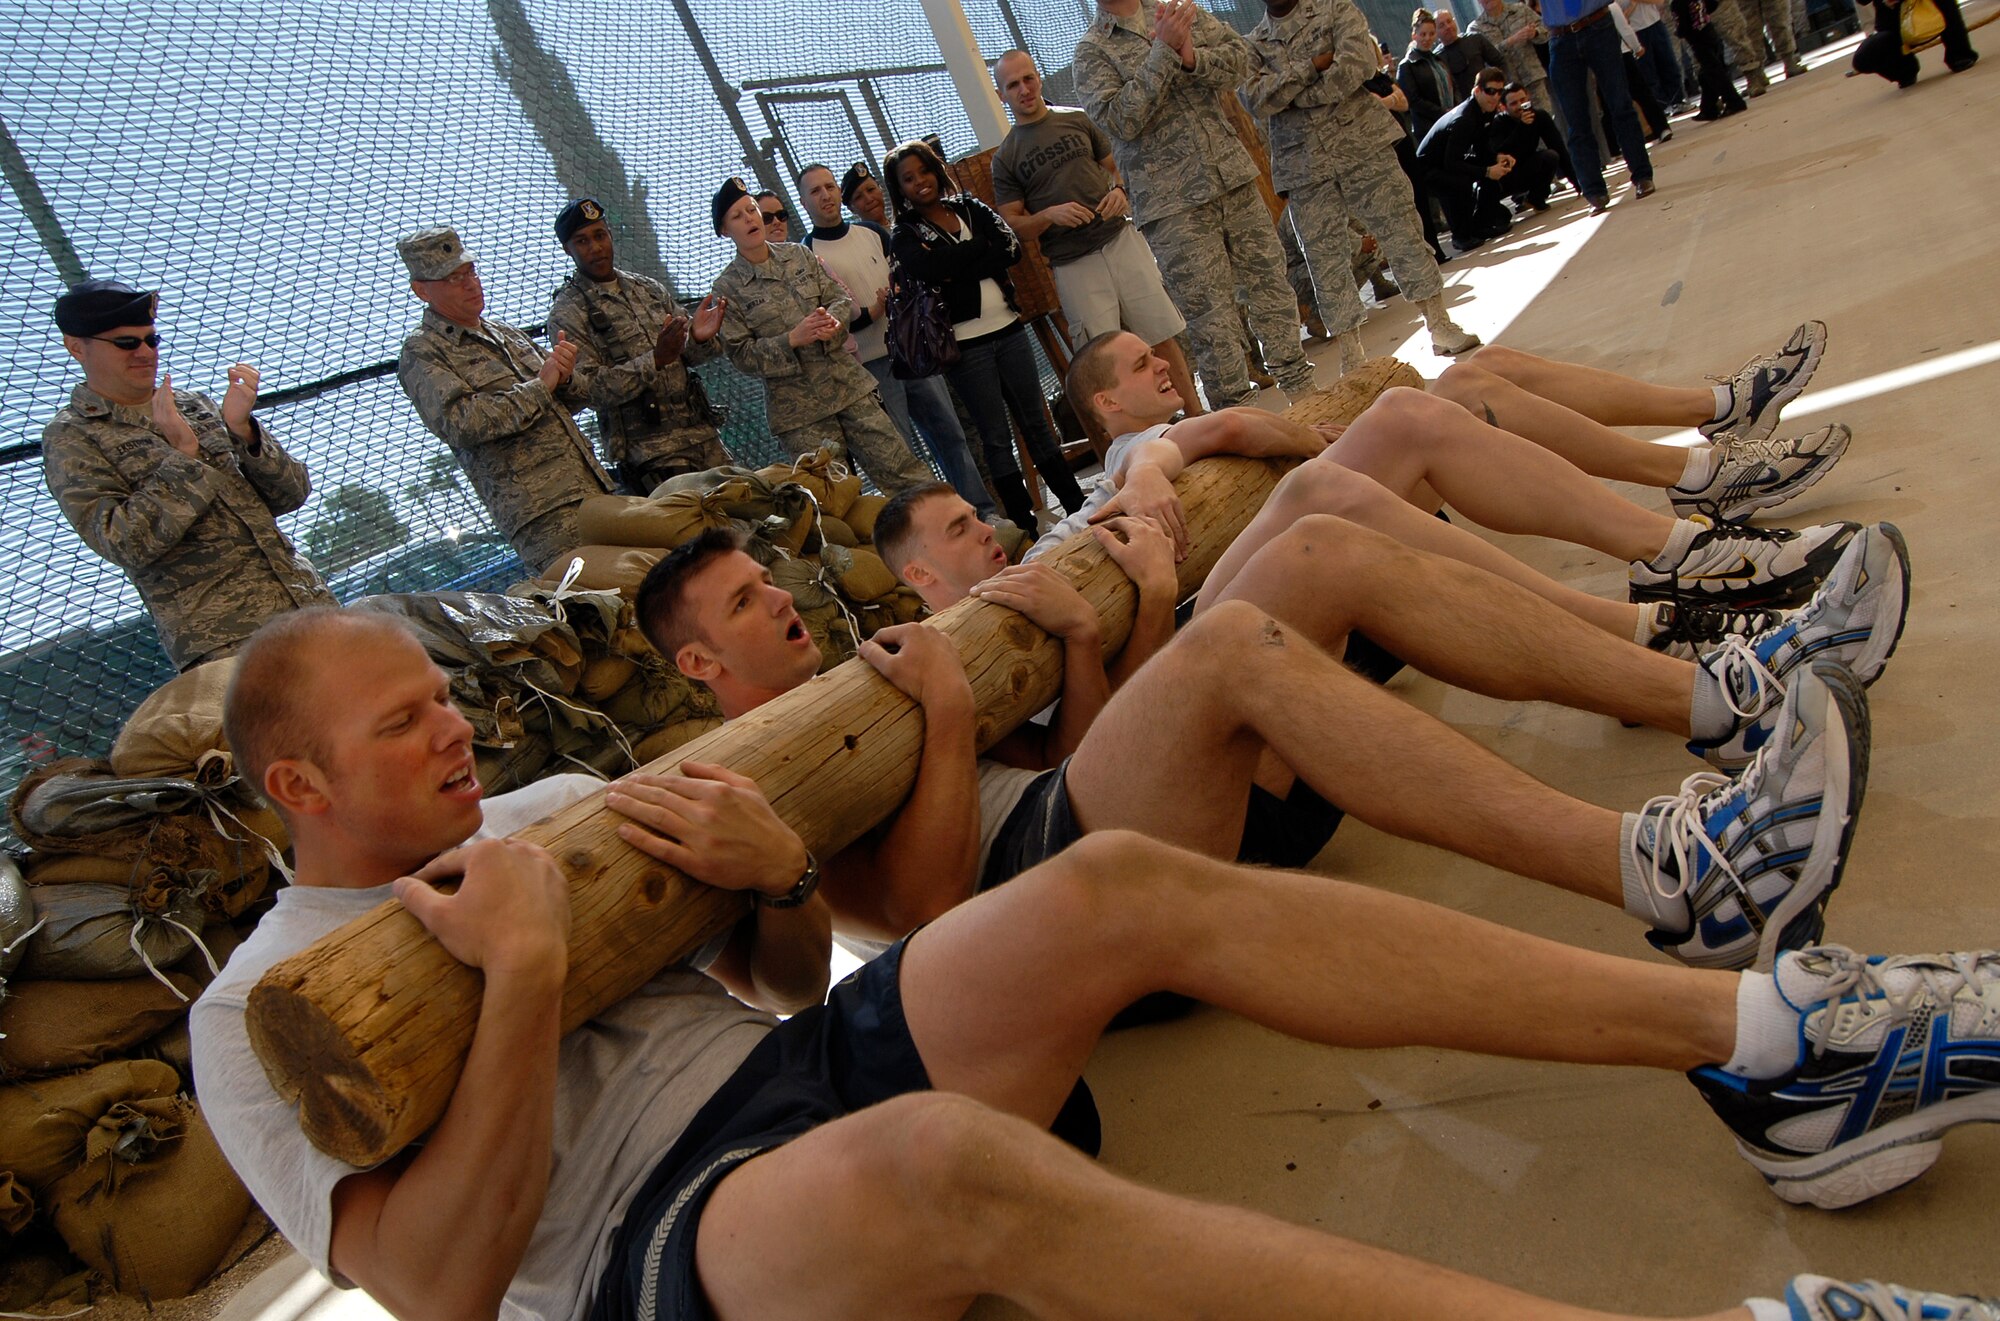 A four-man team from the 56th Security Forces Squadron demonstrate some hard-core techniques in the newly-minted Combat PT Course on Luke Air Force Base, Ariz.  (U.S. Air Force photo by Tech. Sgt. Jeffrey A. Wolfe)